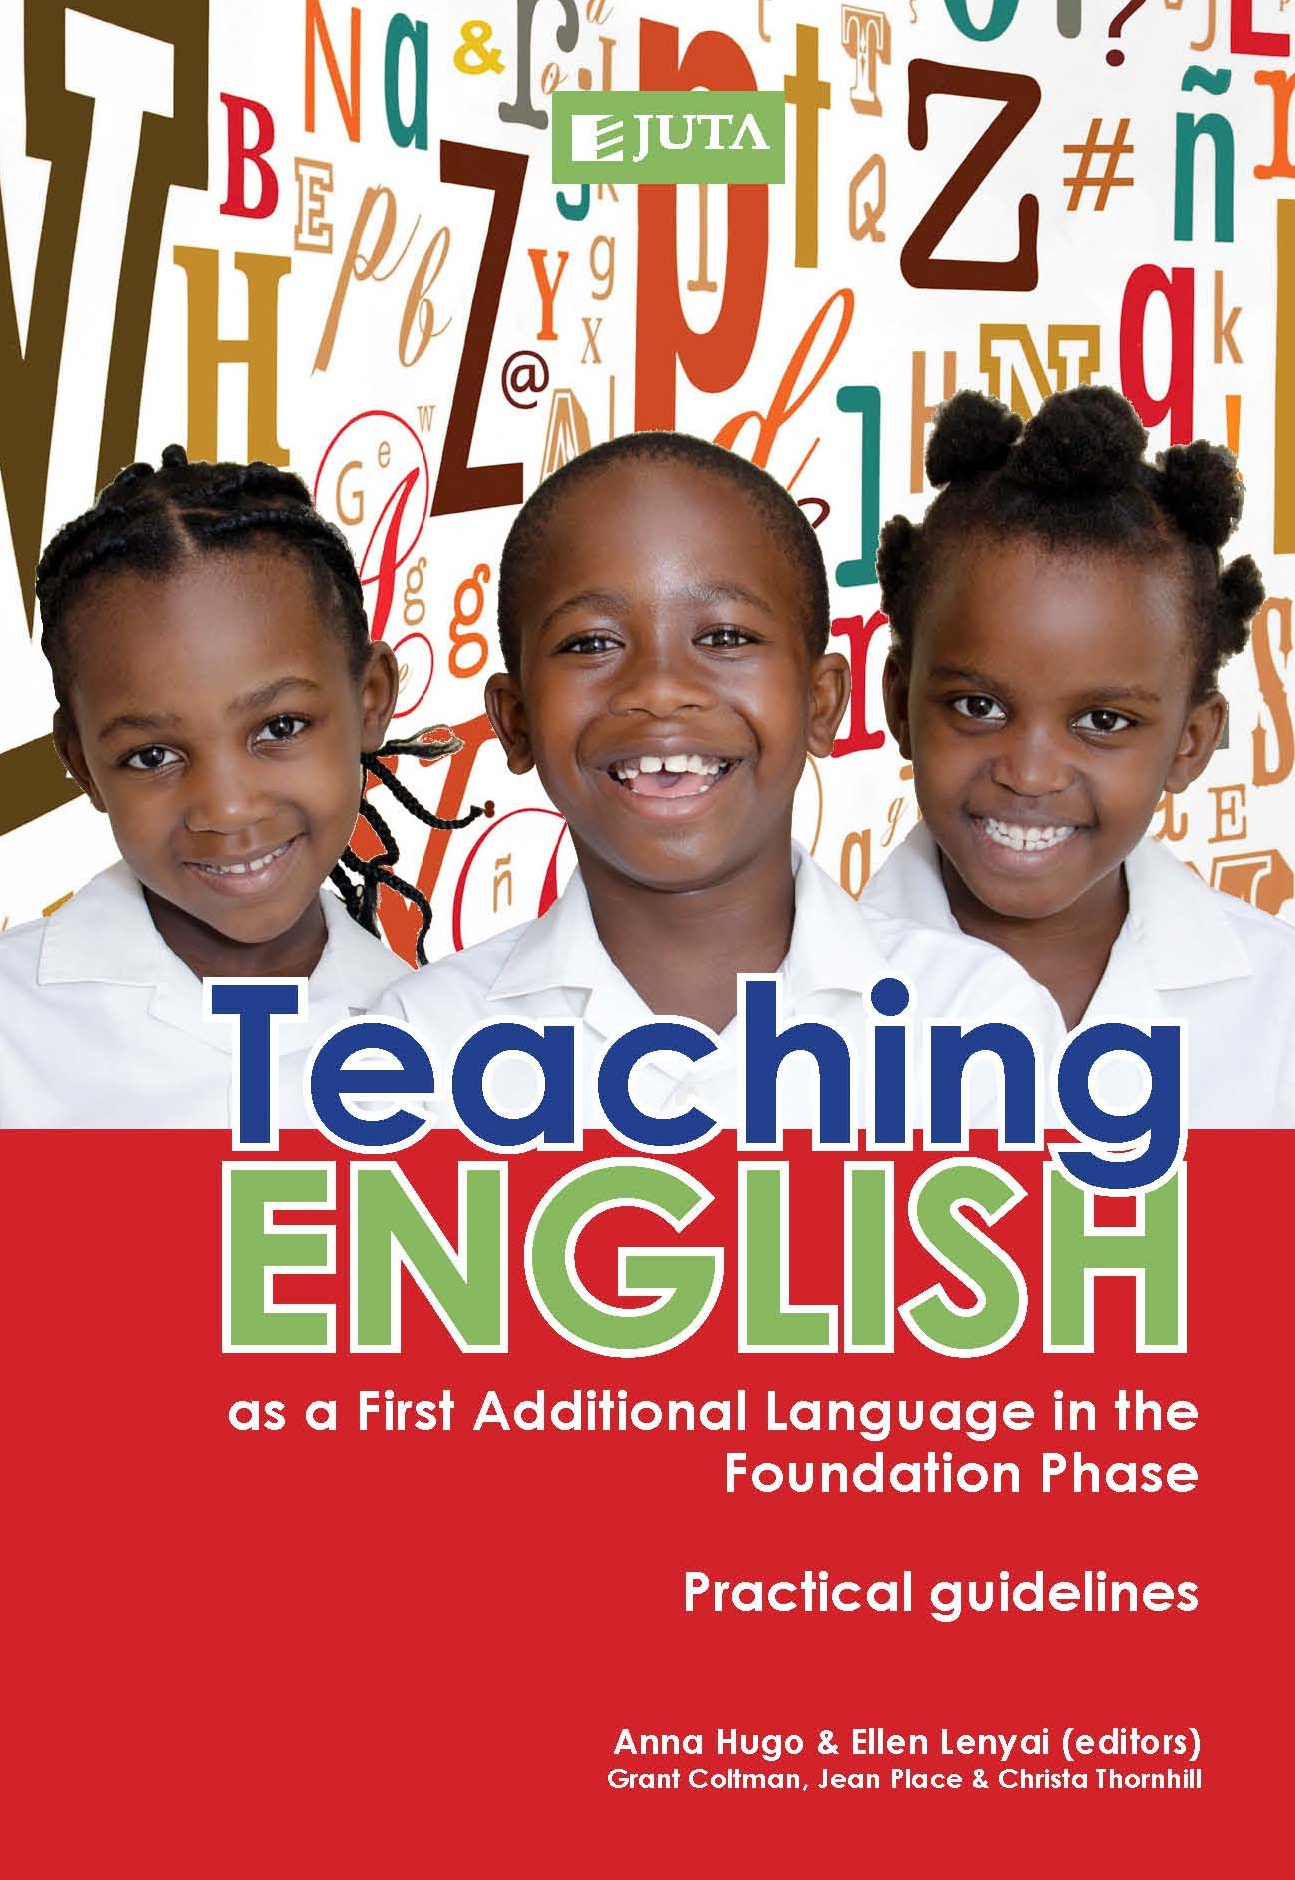 Teaching English: as a First Additional Language in the Foundation Phase